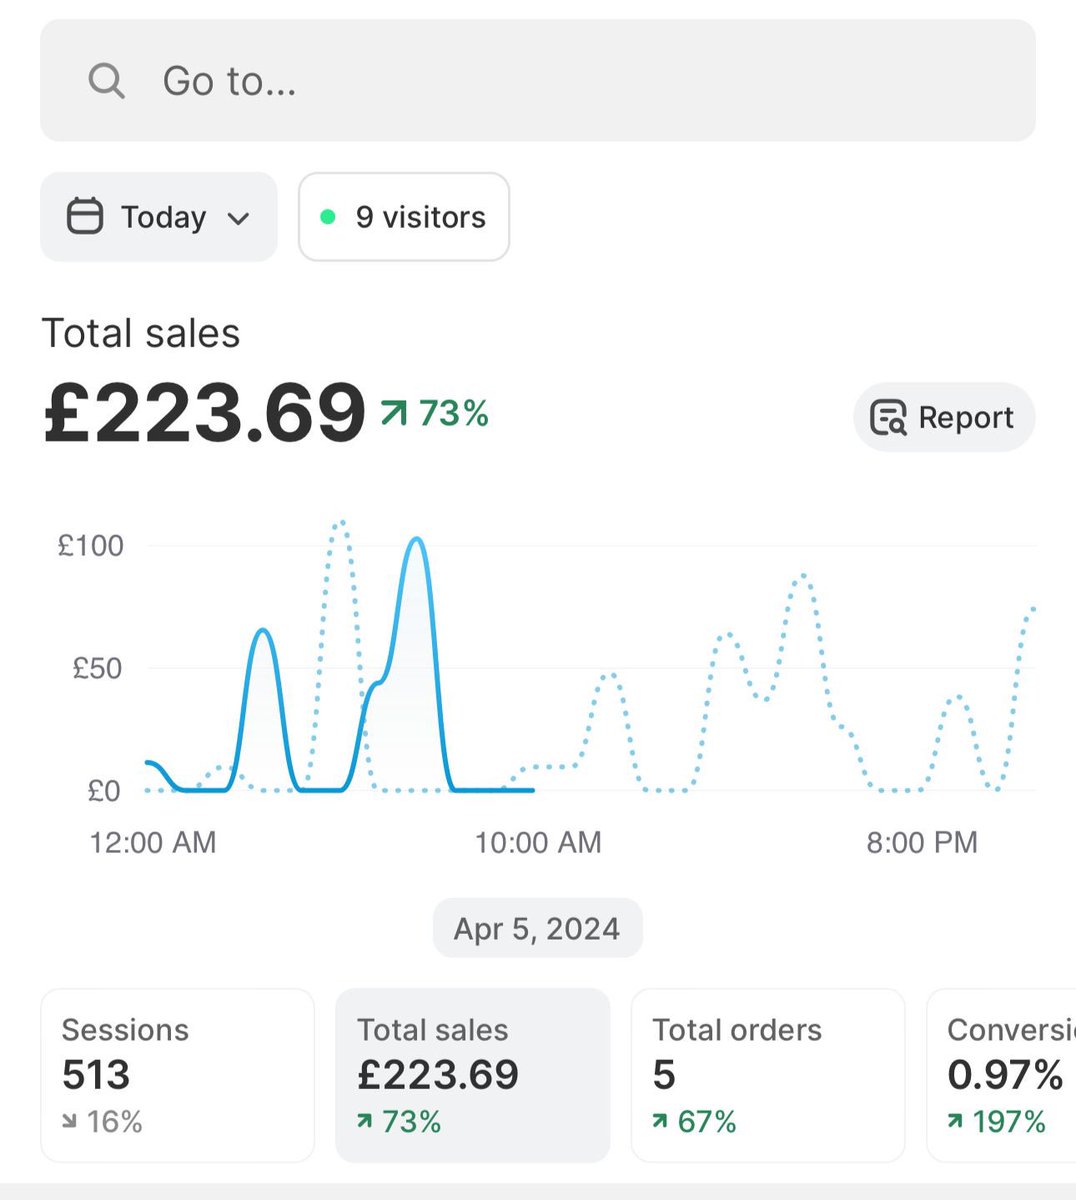 A new month and another opportunity to test new products and further expand the portfolio. I started testing this product a week ago now Same strategies/principles I use on all products I test Numbers running up nicely Can we hit a £1k day by the end of the weekend?